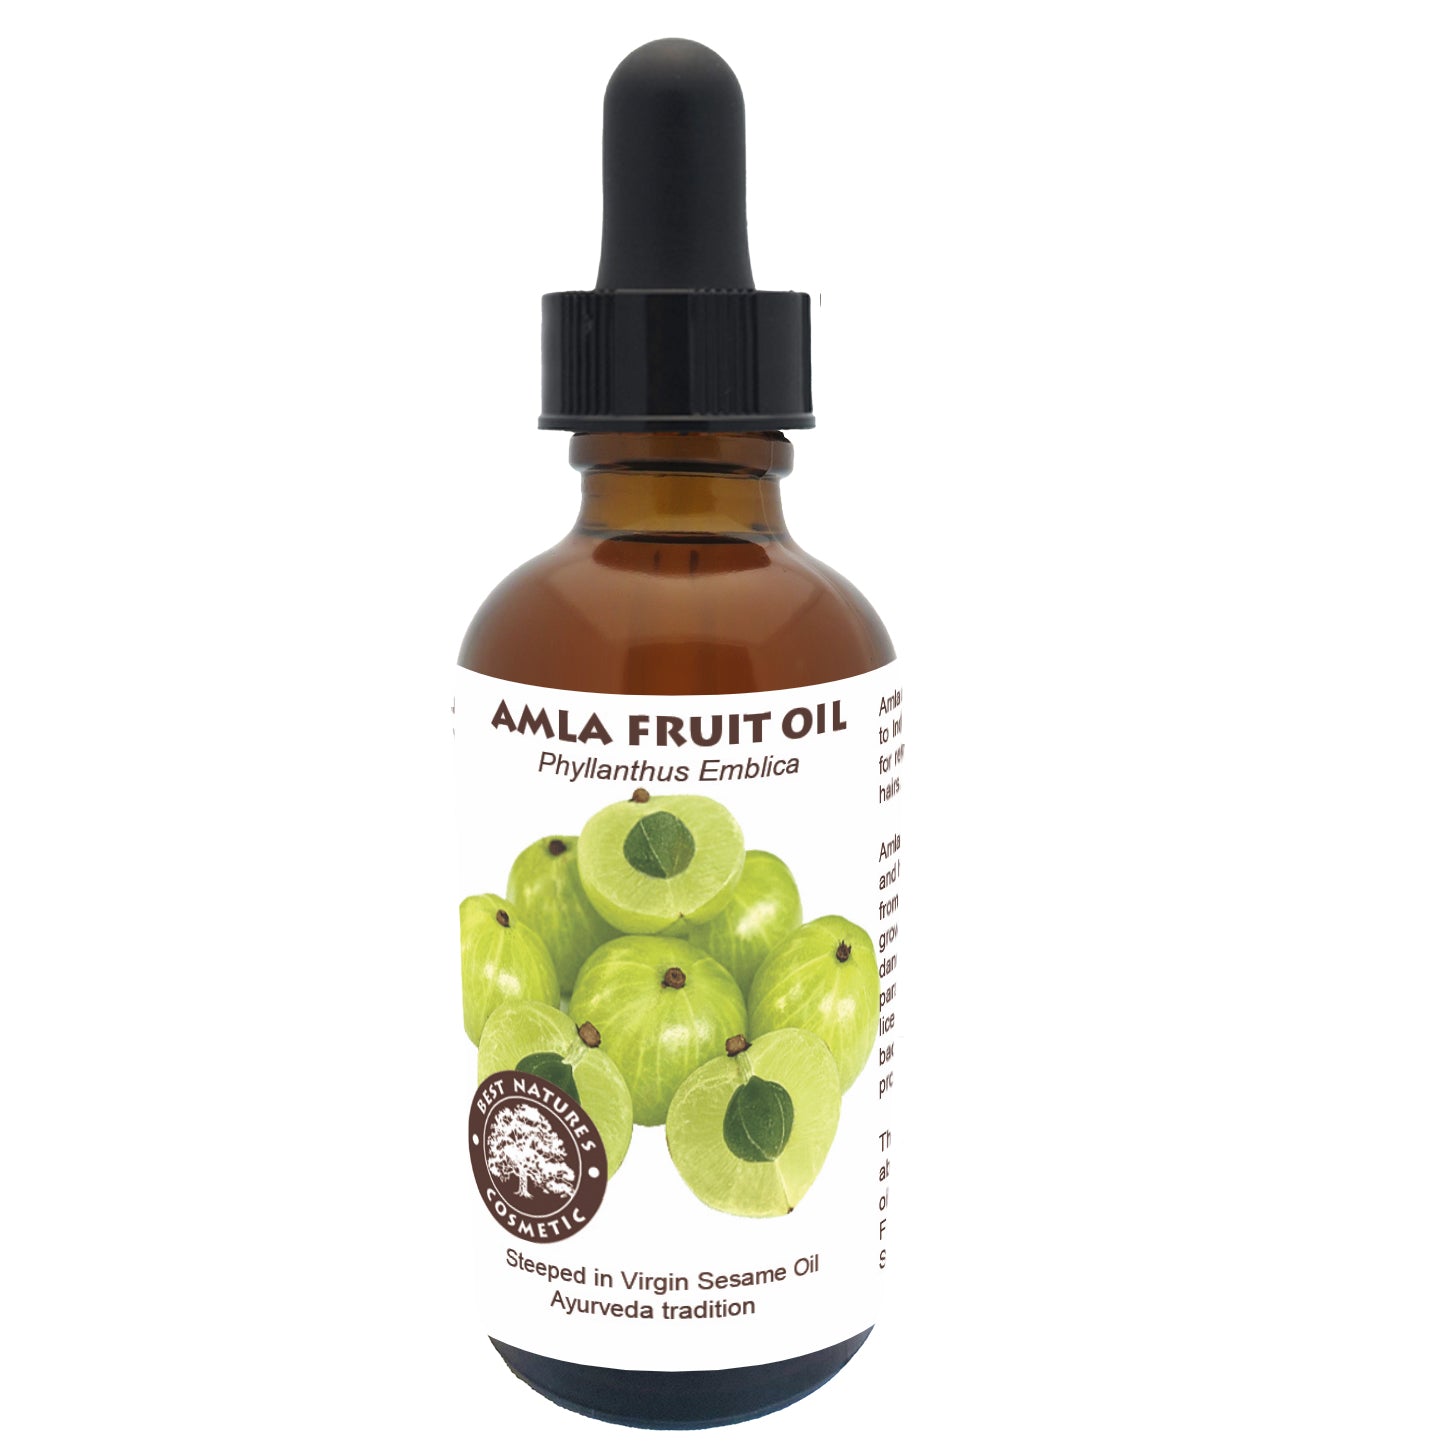 Amla Oil strengthens hair, reduce premature pigment loss from hair, or greying, stimulate hair growth, reduce hair loss, dandruff ...